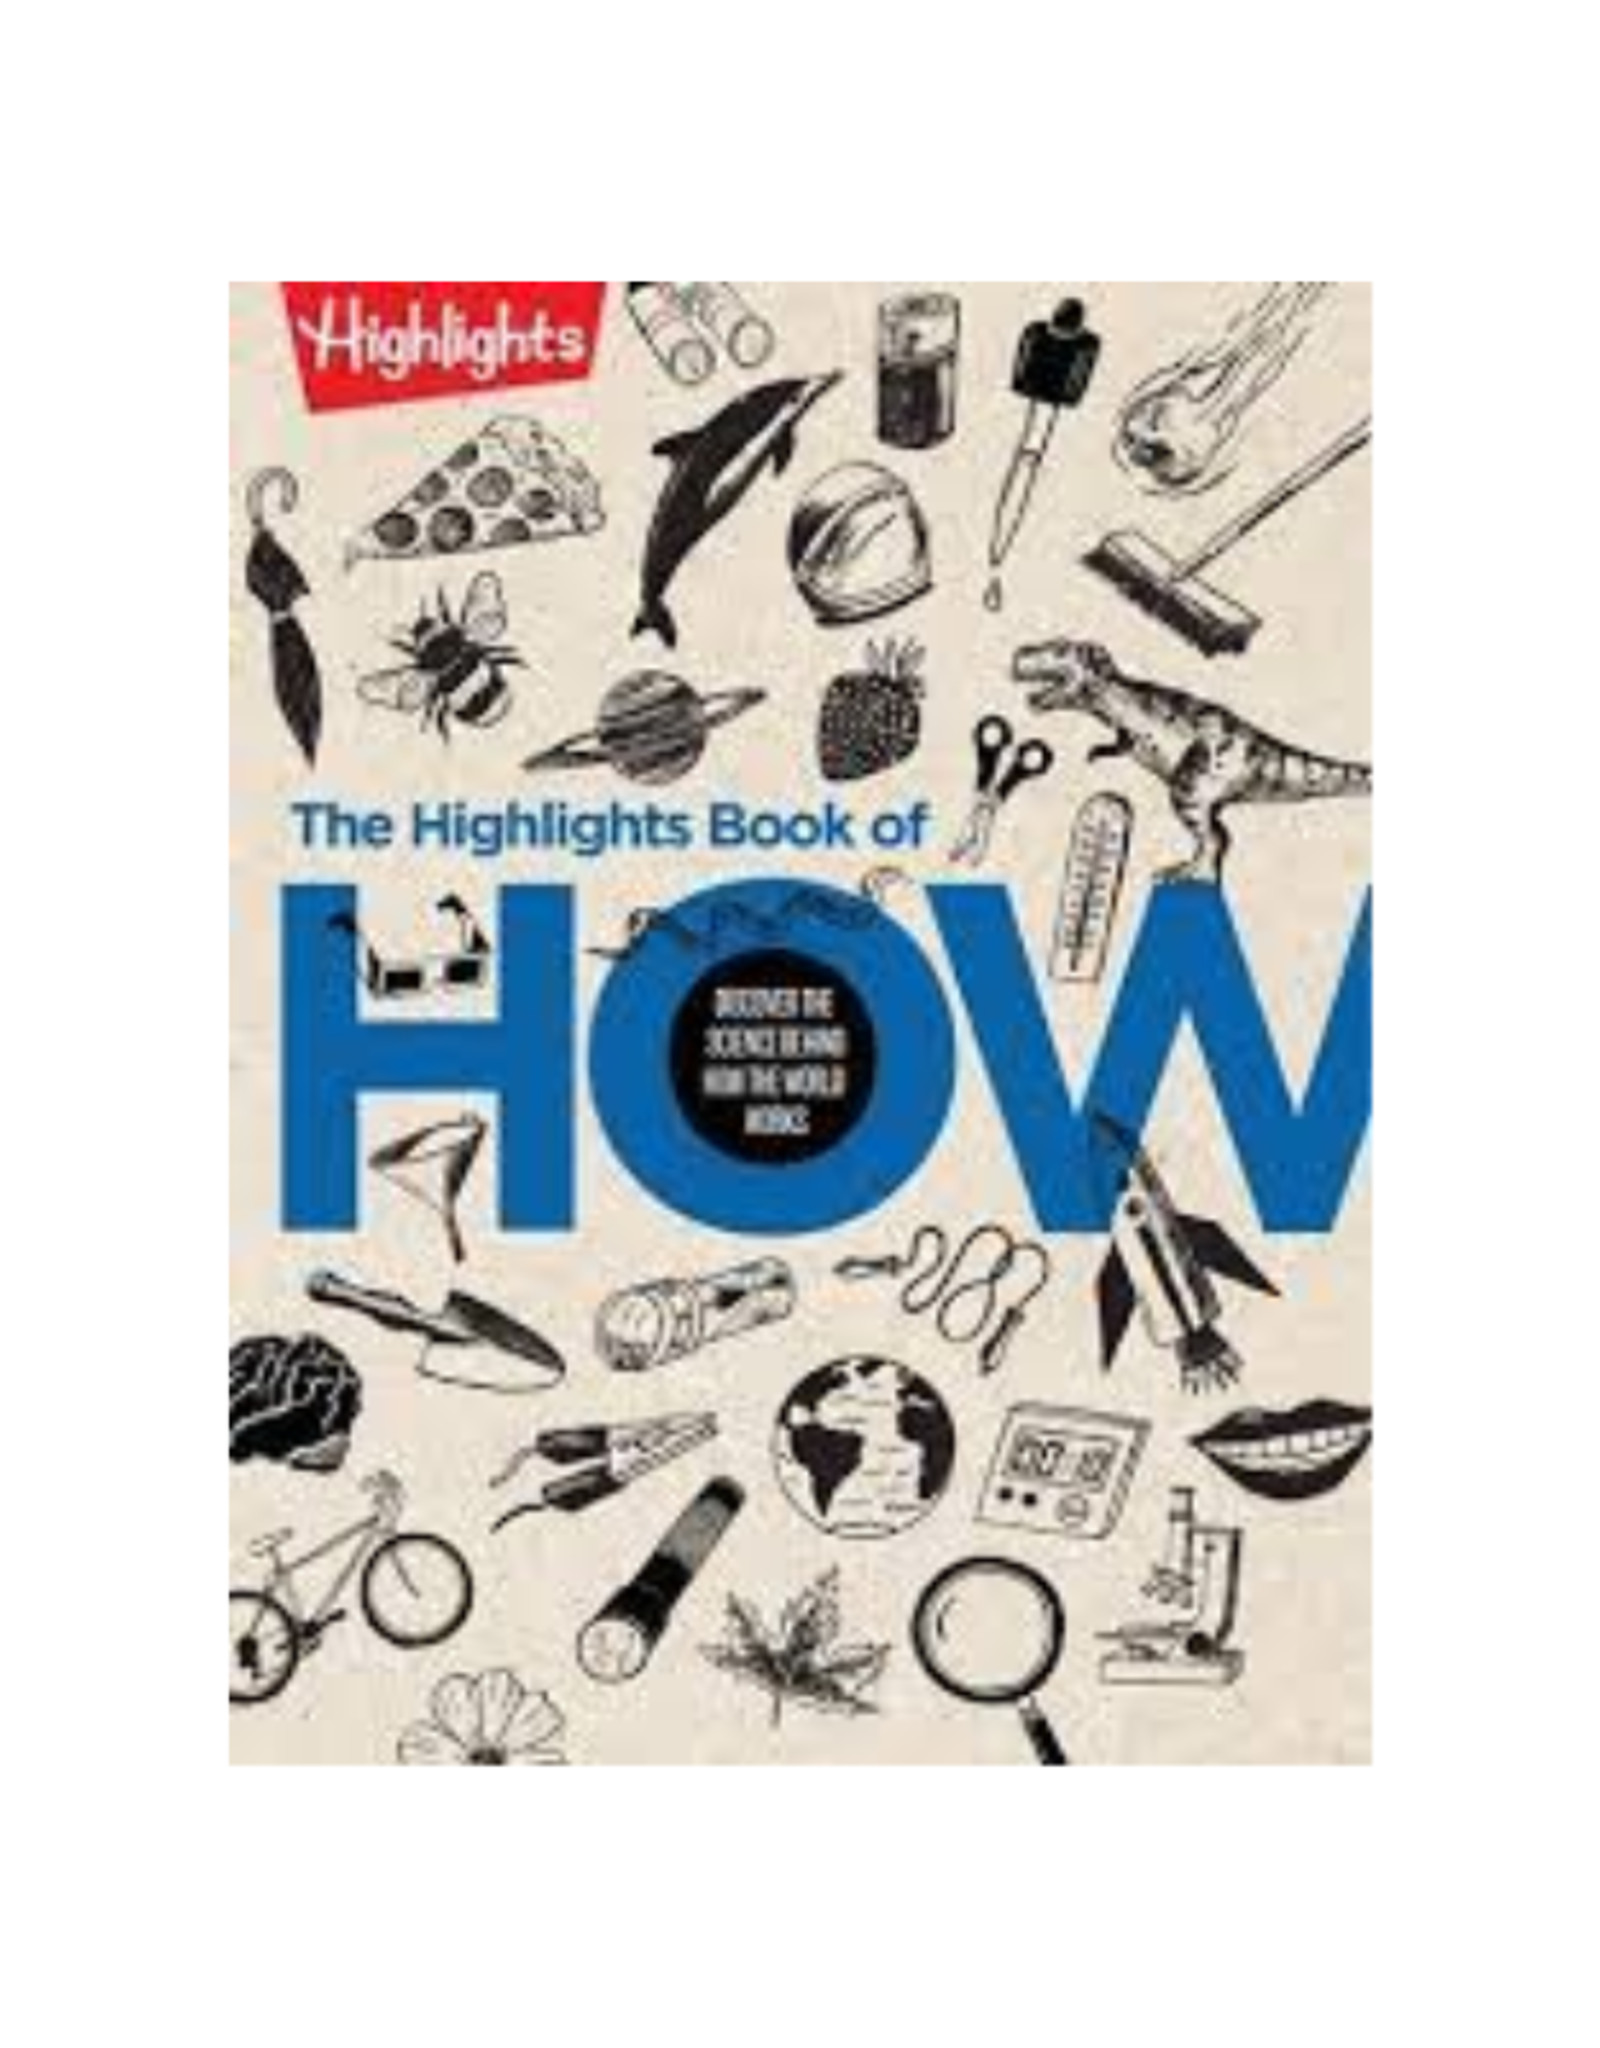 The Highlights Book of How